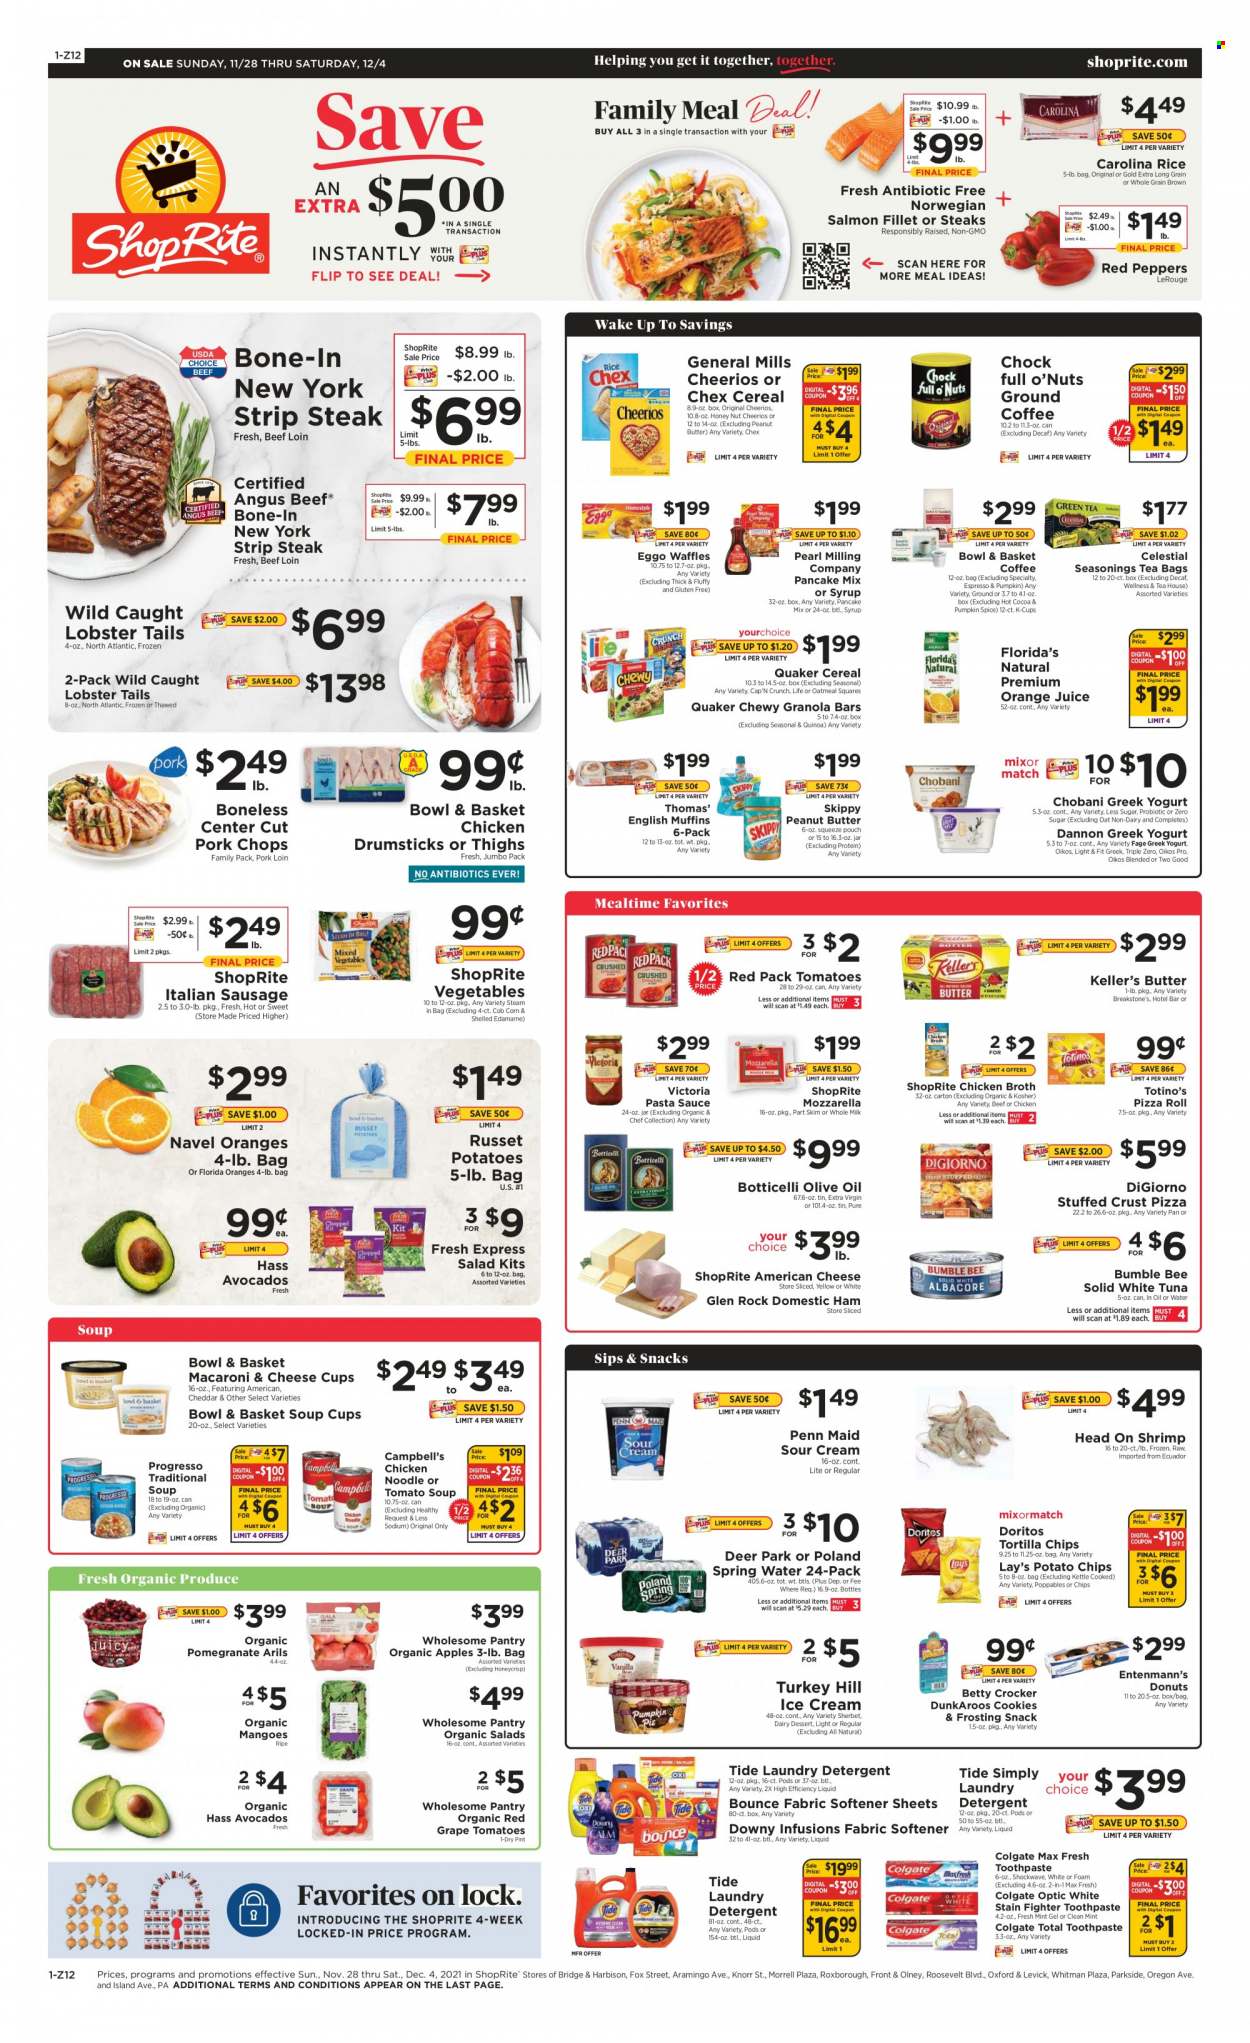 thumbnail - ShopRite Flyer - 11/28/2021 - 12/04/2021 - Sales products - english muffins, pizza rolls, Bowl & Basket, donut, waffles, Entenmann's, pancake mix, Edamame, russet potatoes, snack, salad, red peppers, avocado, fish fillets, lobster, salmon, salmon fillet, tuna, lobster tail, shrimps, Campbell's, tomato soup, pasta sauce, chicken soup, soup, Bumble Bee, Knorr, sauce, Quaker, Progresso, ready meal, italian sausage, american cheese, greek yoghurt, Chobani, Dannon, ice cream, sherbet, cookies, Florida's Natural, General Mills, Doritos, tortilla chips, potato chips, Lay’s, salty snack, chicken broth, oatmeal, broth, canned tuna, canned fish, Cheerios, granola bar, quinoa, olive oil, syrup, orange juice, juice, spring water, bottled water, hot cocoa, tea bags, ground coffee, alcohol, gin, chicken thighs, chicken drumsticks, chicken, beef meat, beef steak, steak, striploin steak, pork chops, pork loin, pork meat, detergent, Tide, fabric softener, laundry detergent, Bounce, Downy Laundry, Colgate, toothpaste, navel oranges. Page 1.